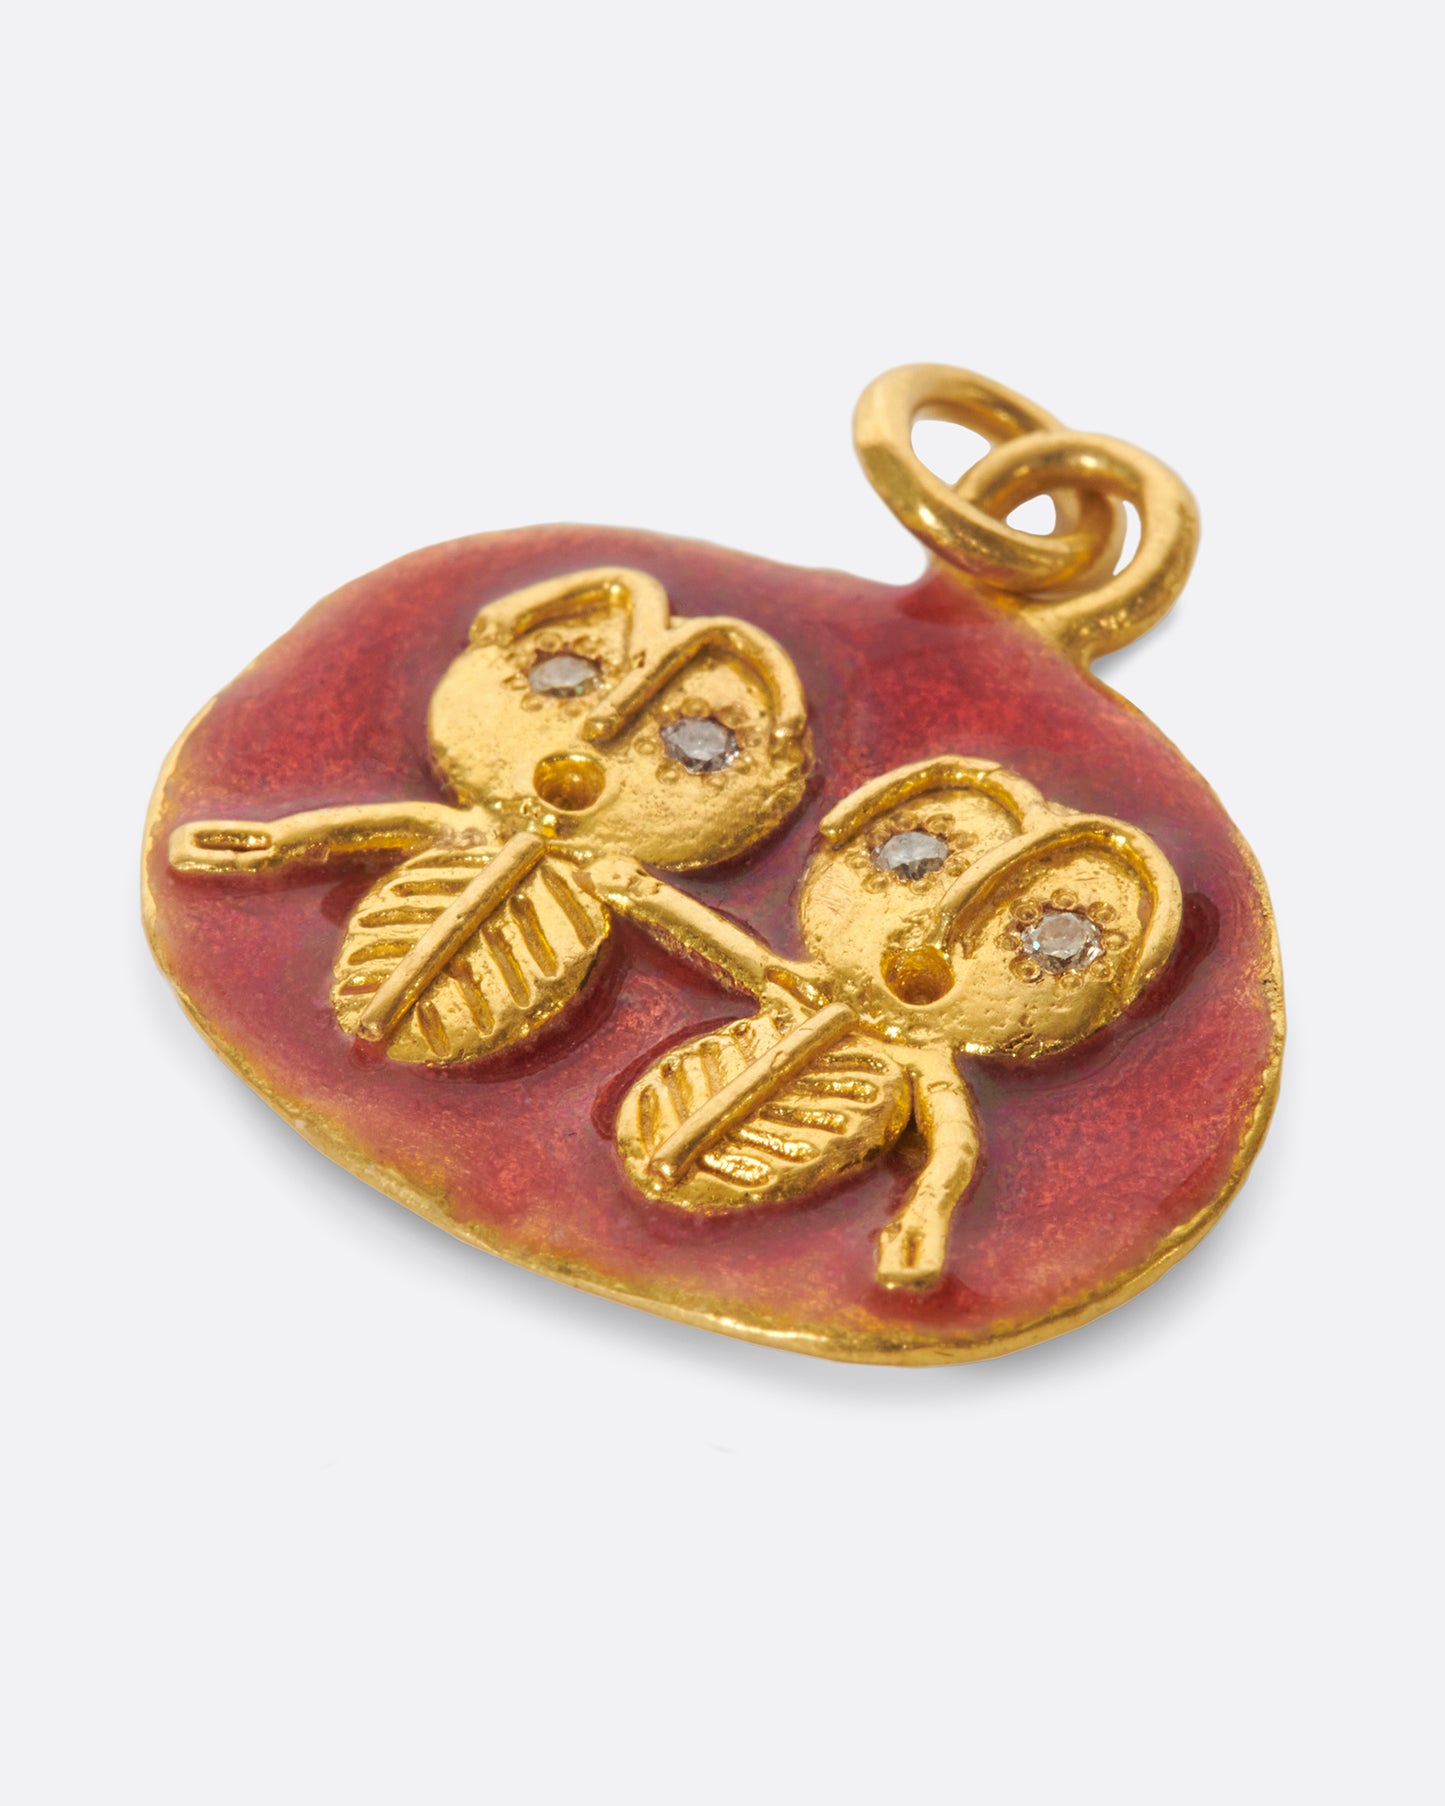 A high karat gold medallion pendant with a pair of hand-sculpted Gemini twins.